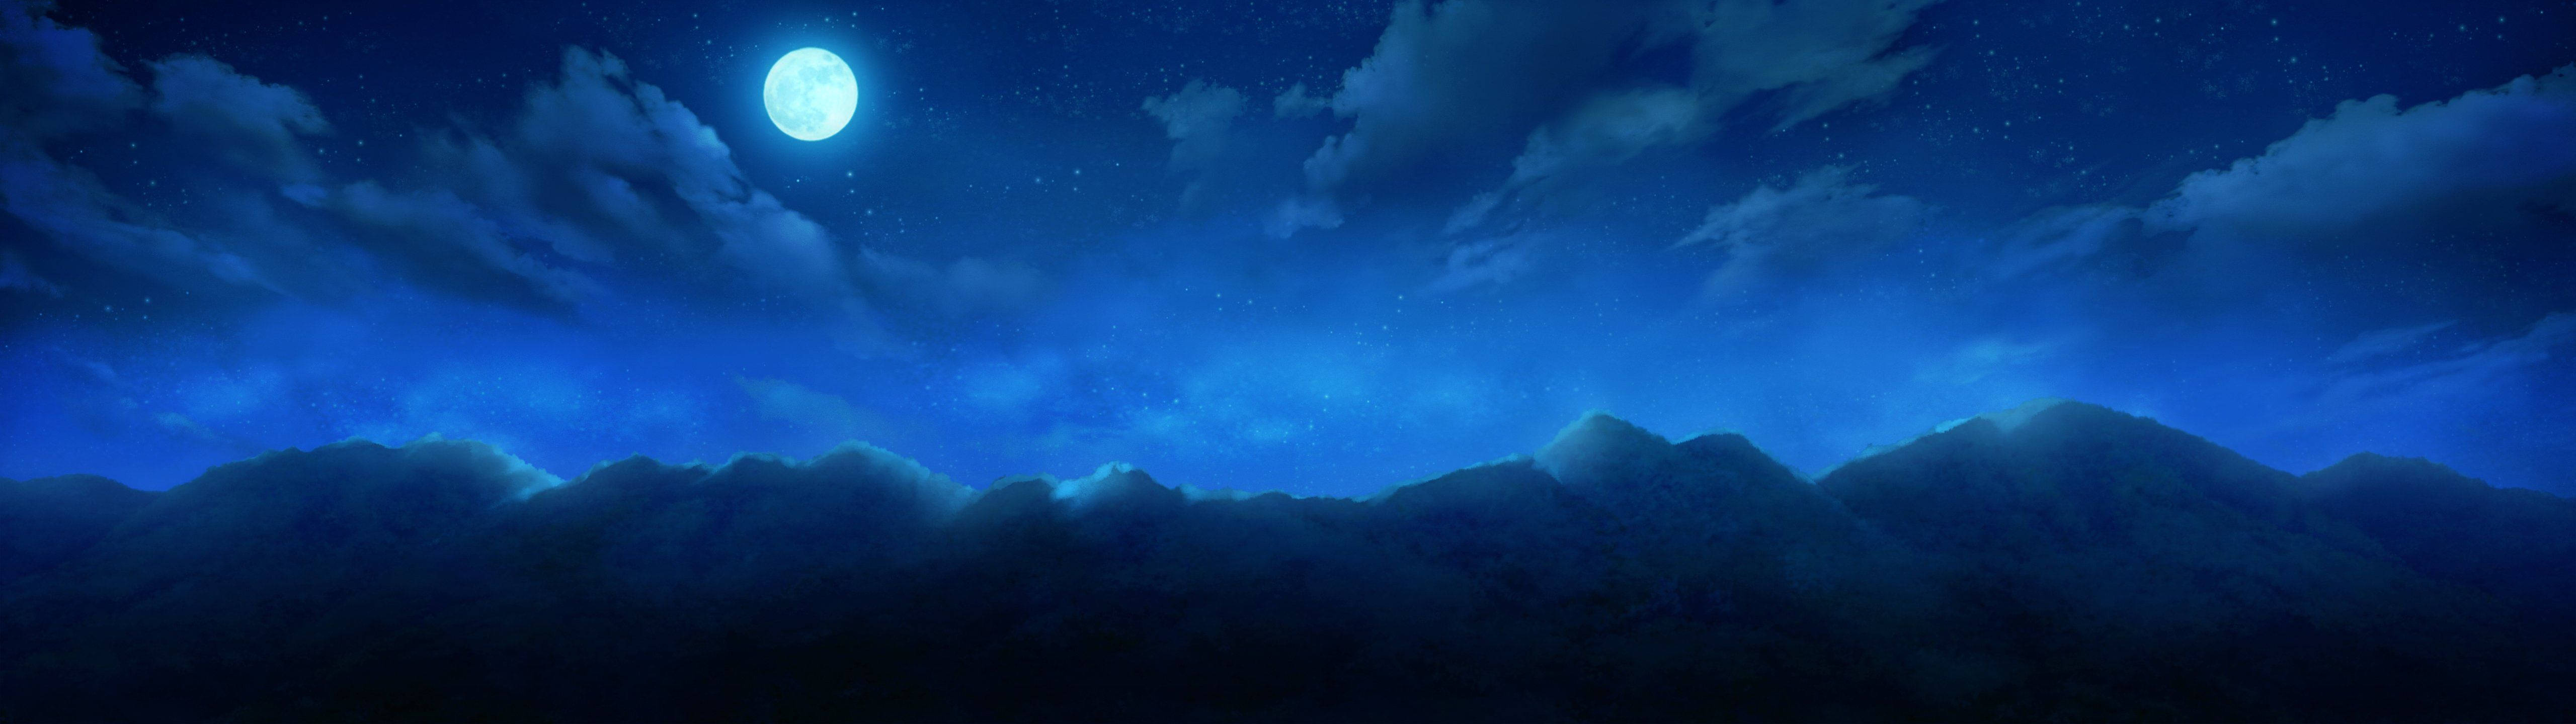 Anime night sky wallpaper 4K is a cool wallpaper for desktop with anime night sky background. - 5120x1440